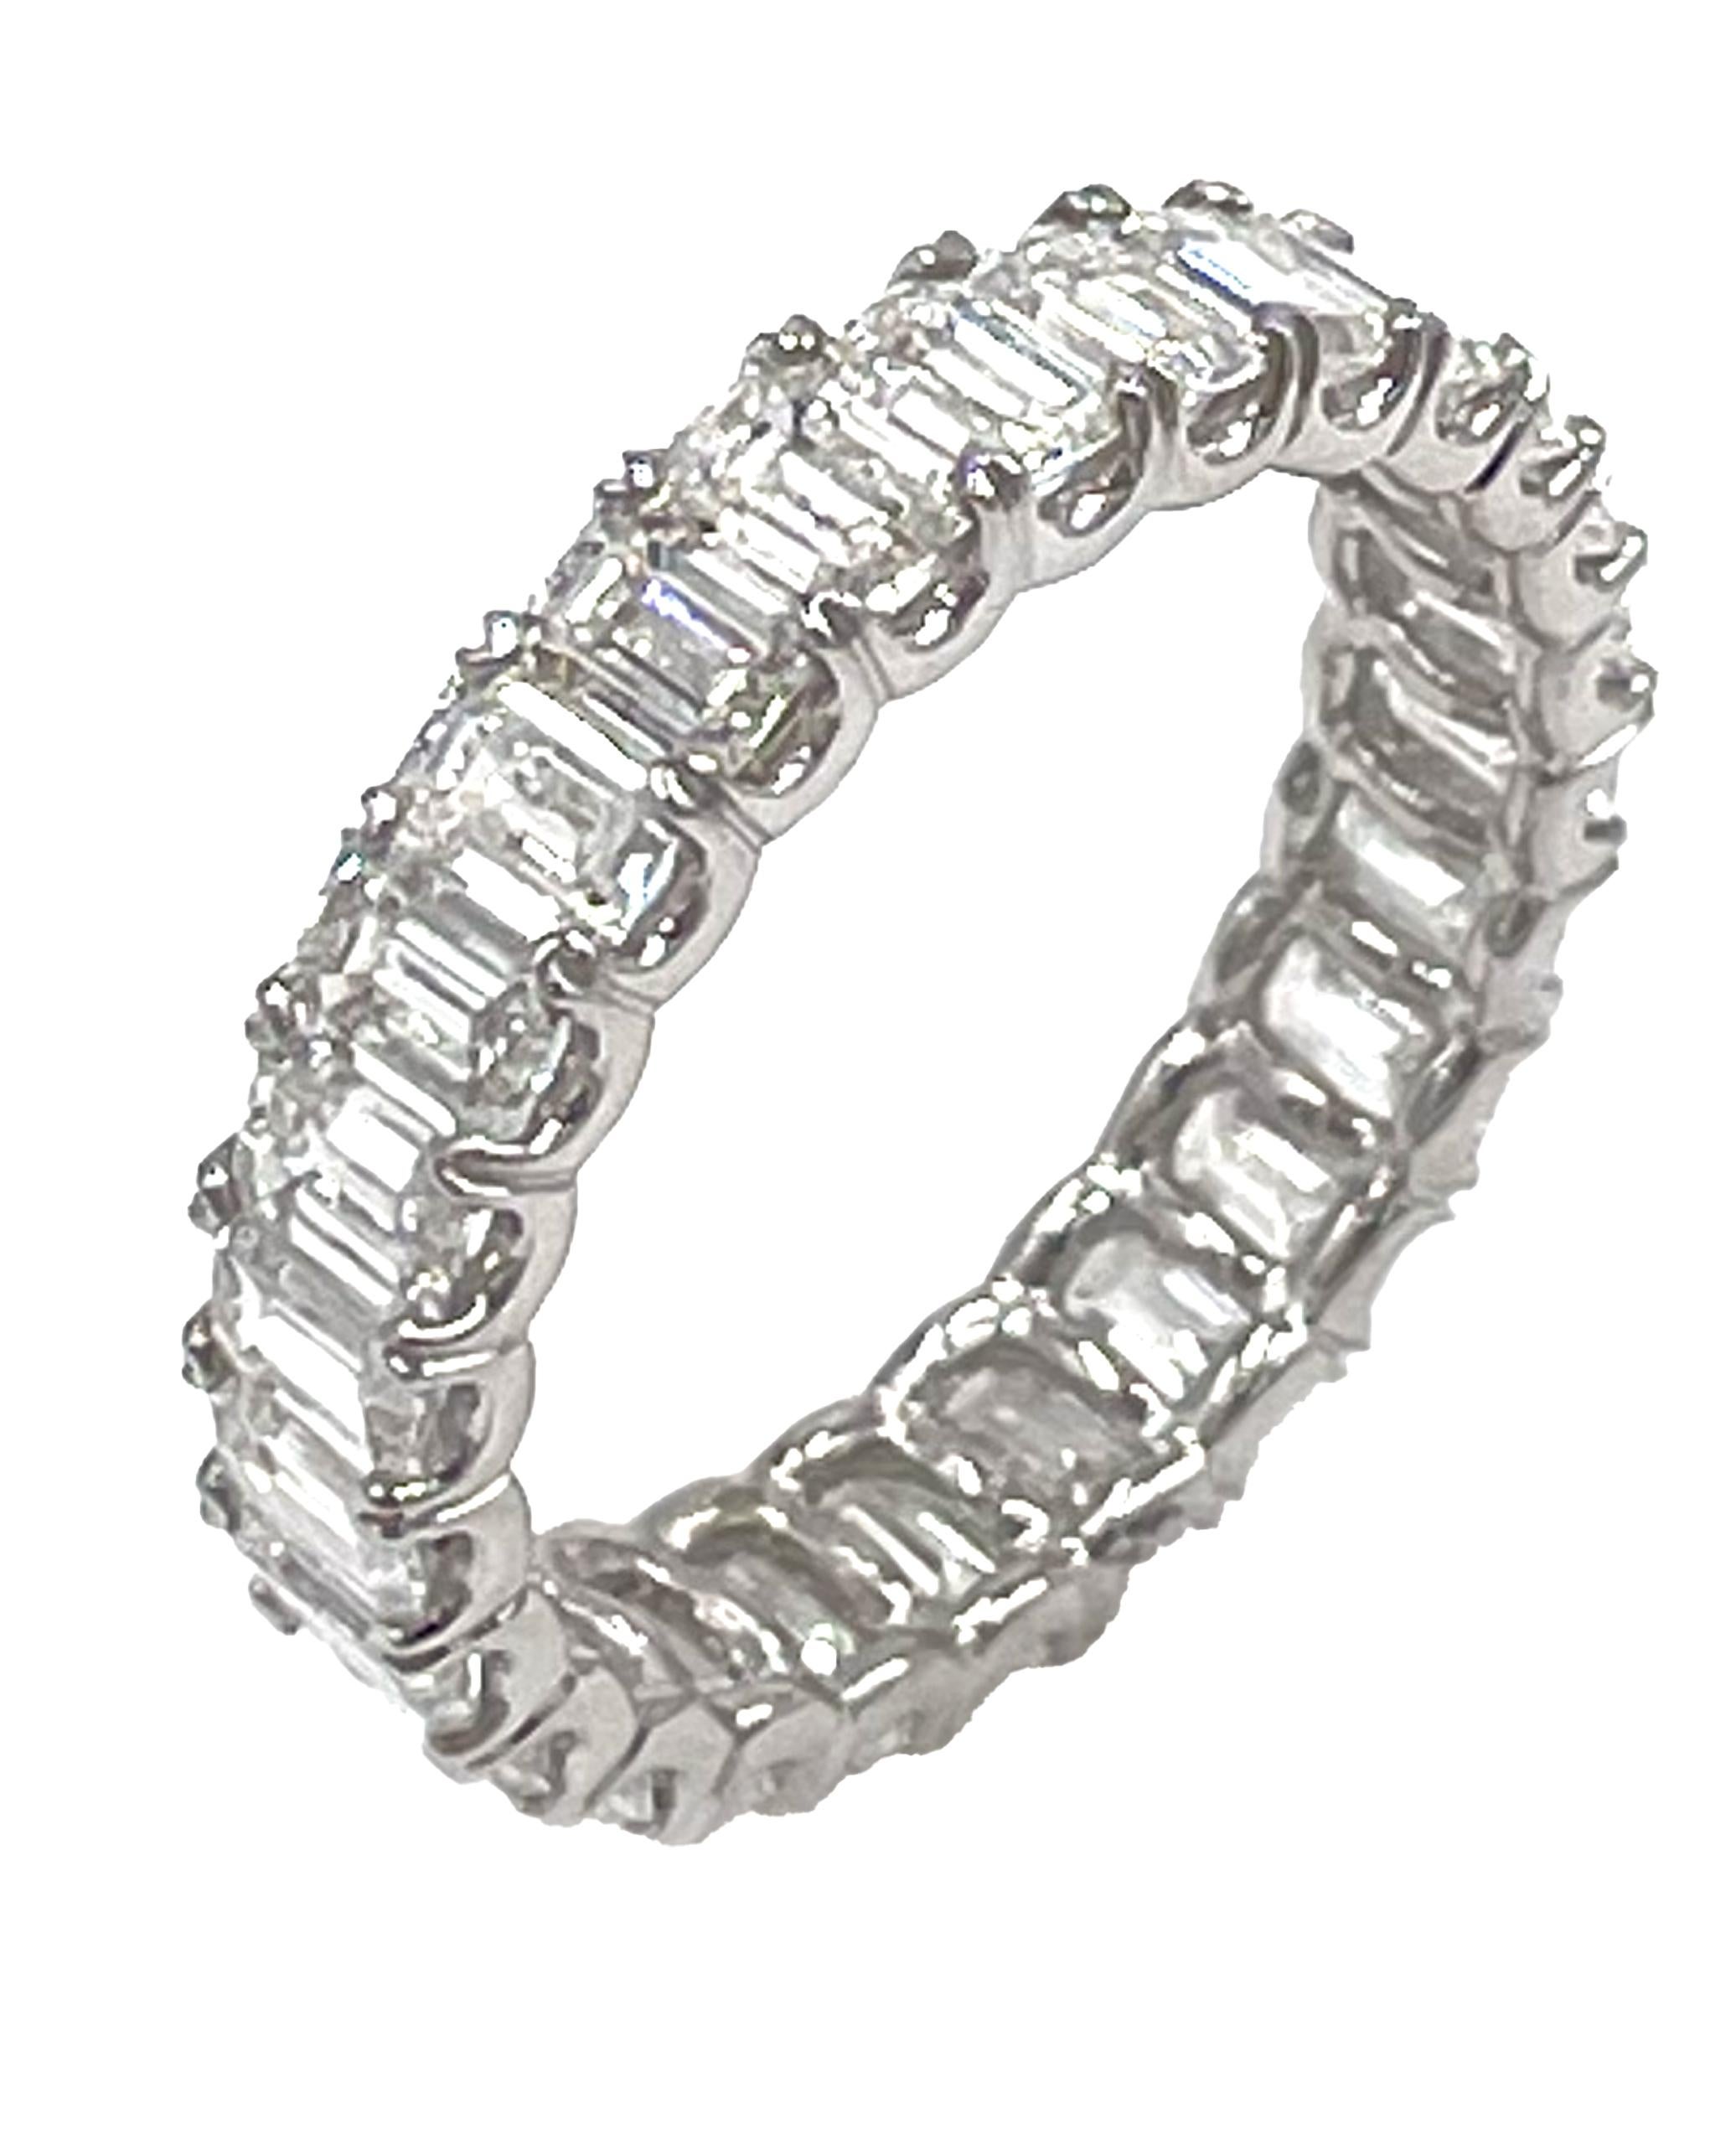 Classic platinum split prong eternity ring furnished with 26 emerald-cut diamonds totaling 3.53 carats total.

- Diamonds are F/G color, VVS clarity
- Finger size: 6.25
- Ring is approximately 4mm wide